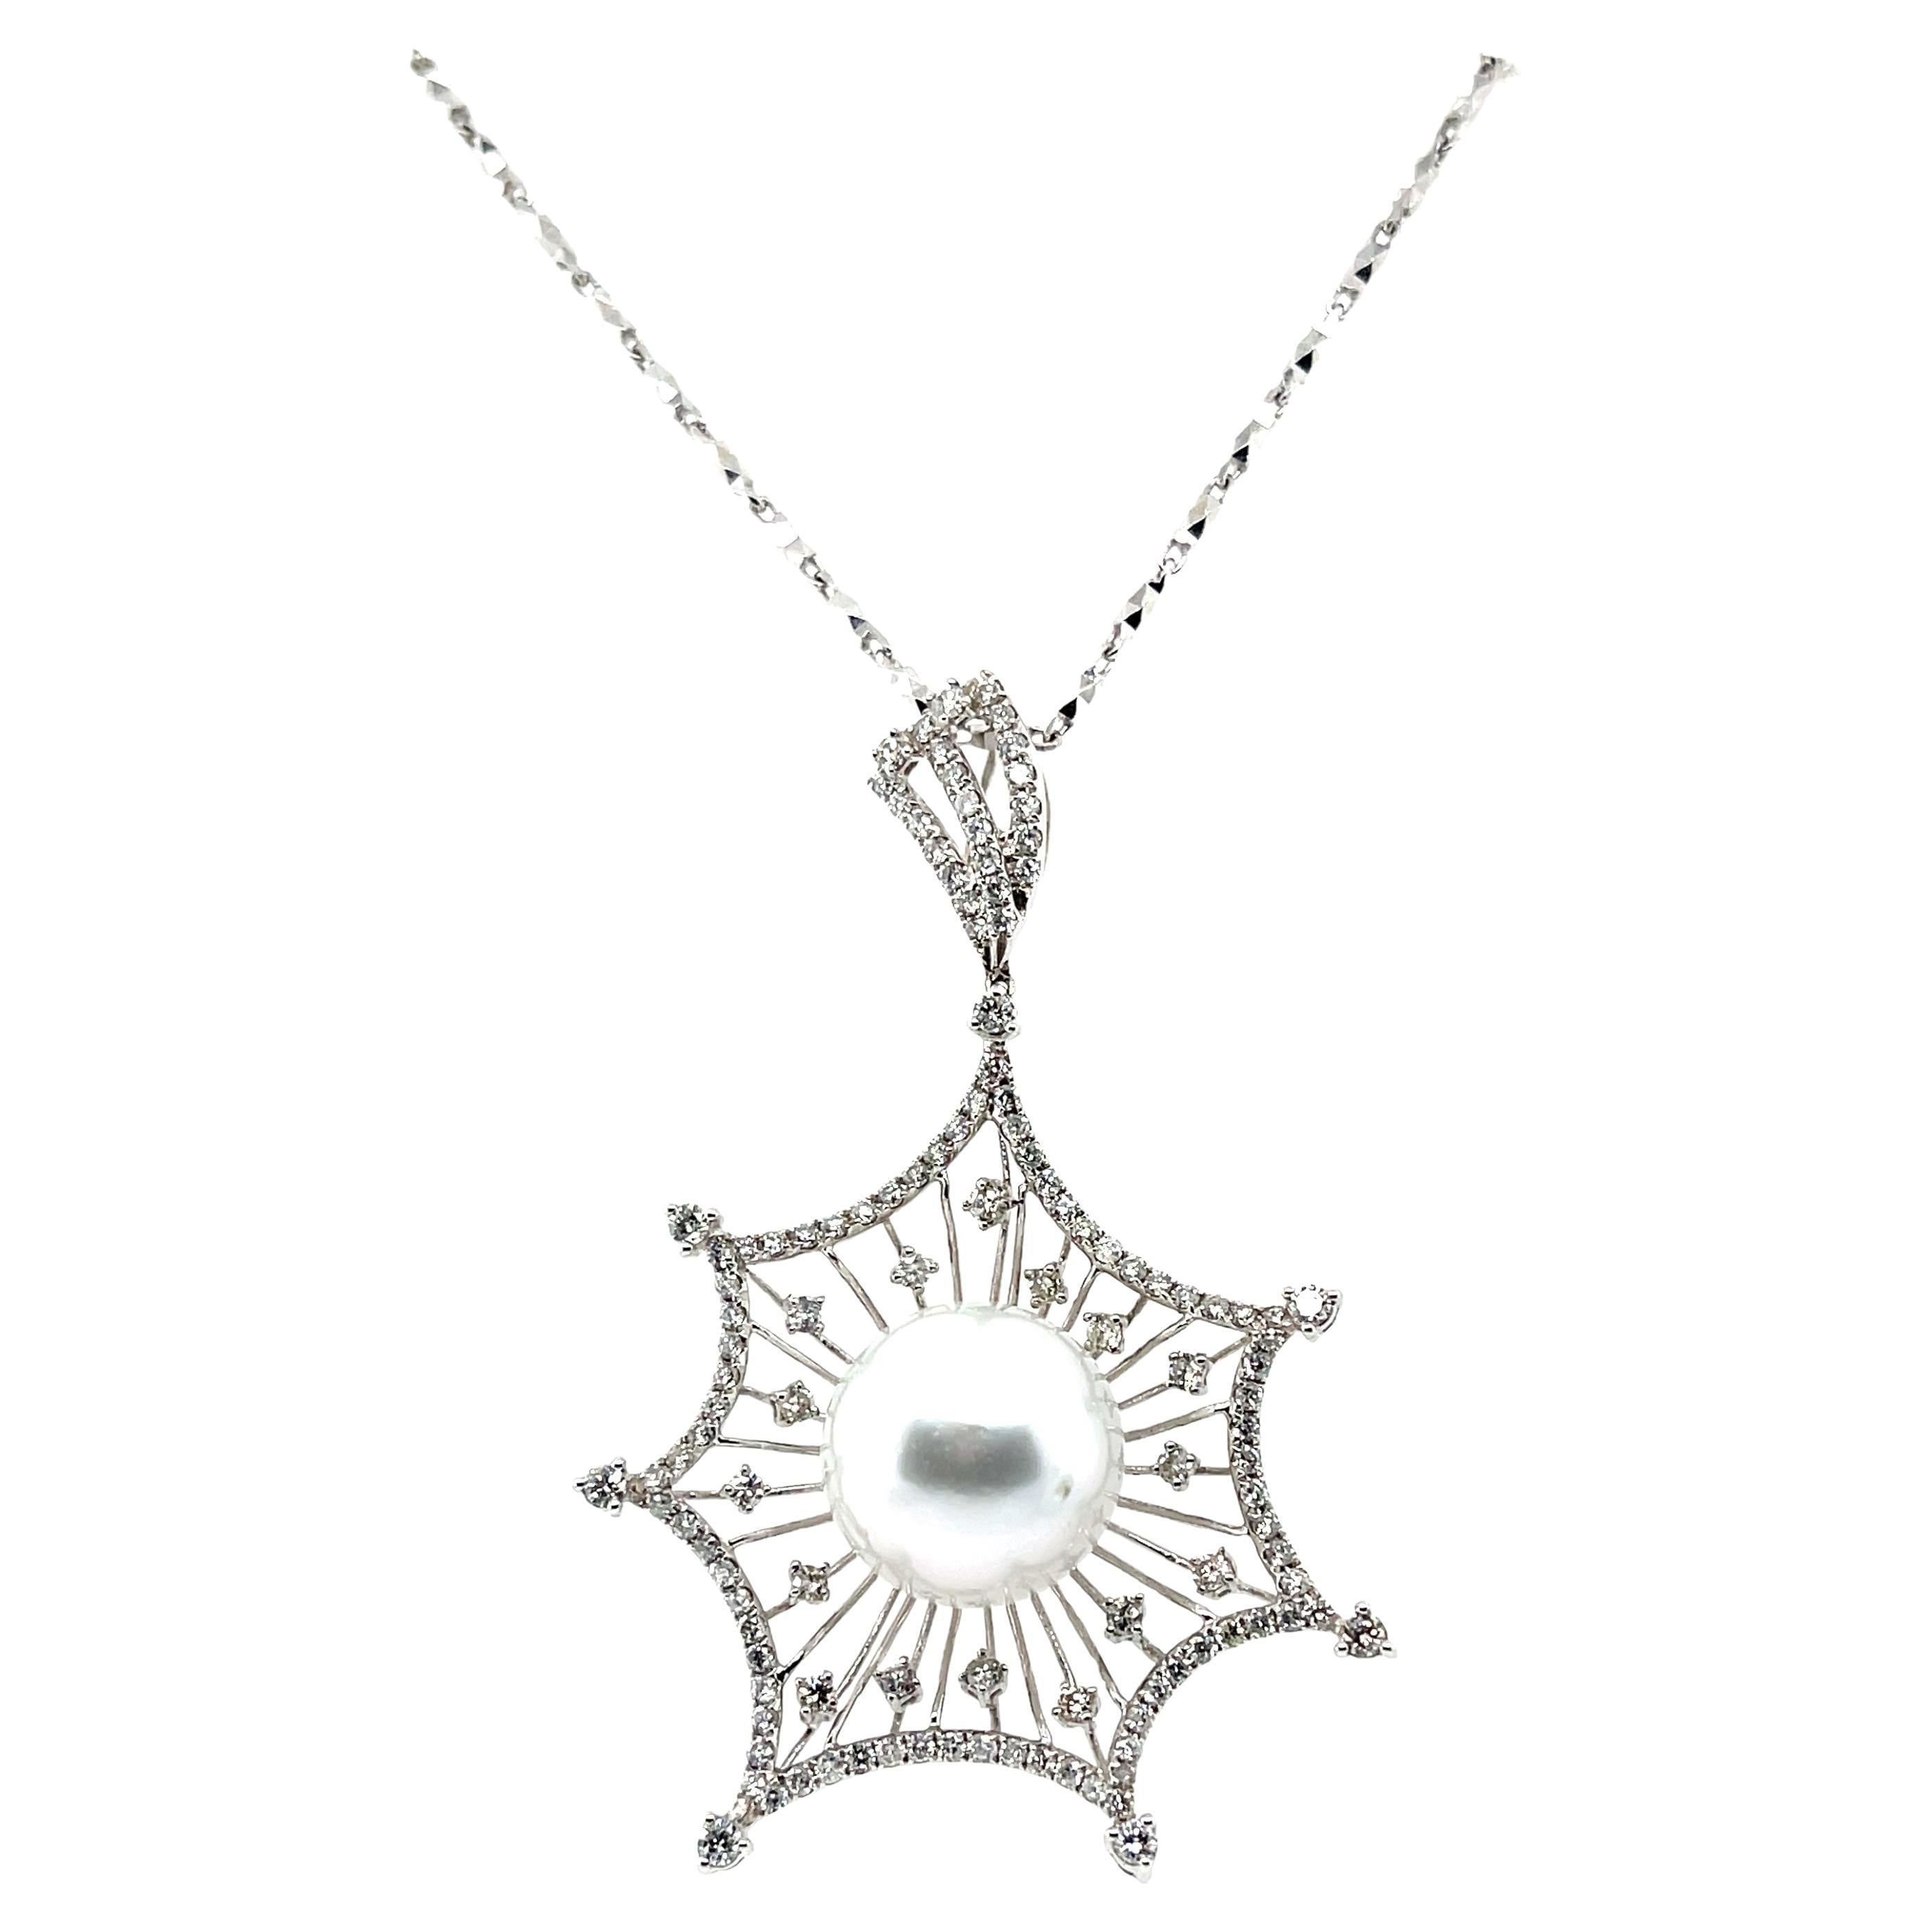 18CT White Gold Diamond and Pearl Necklace and Pendant